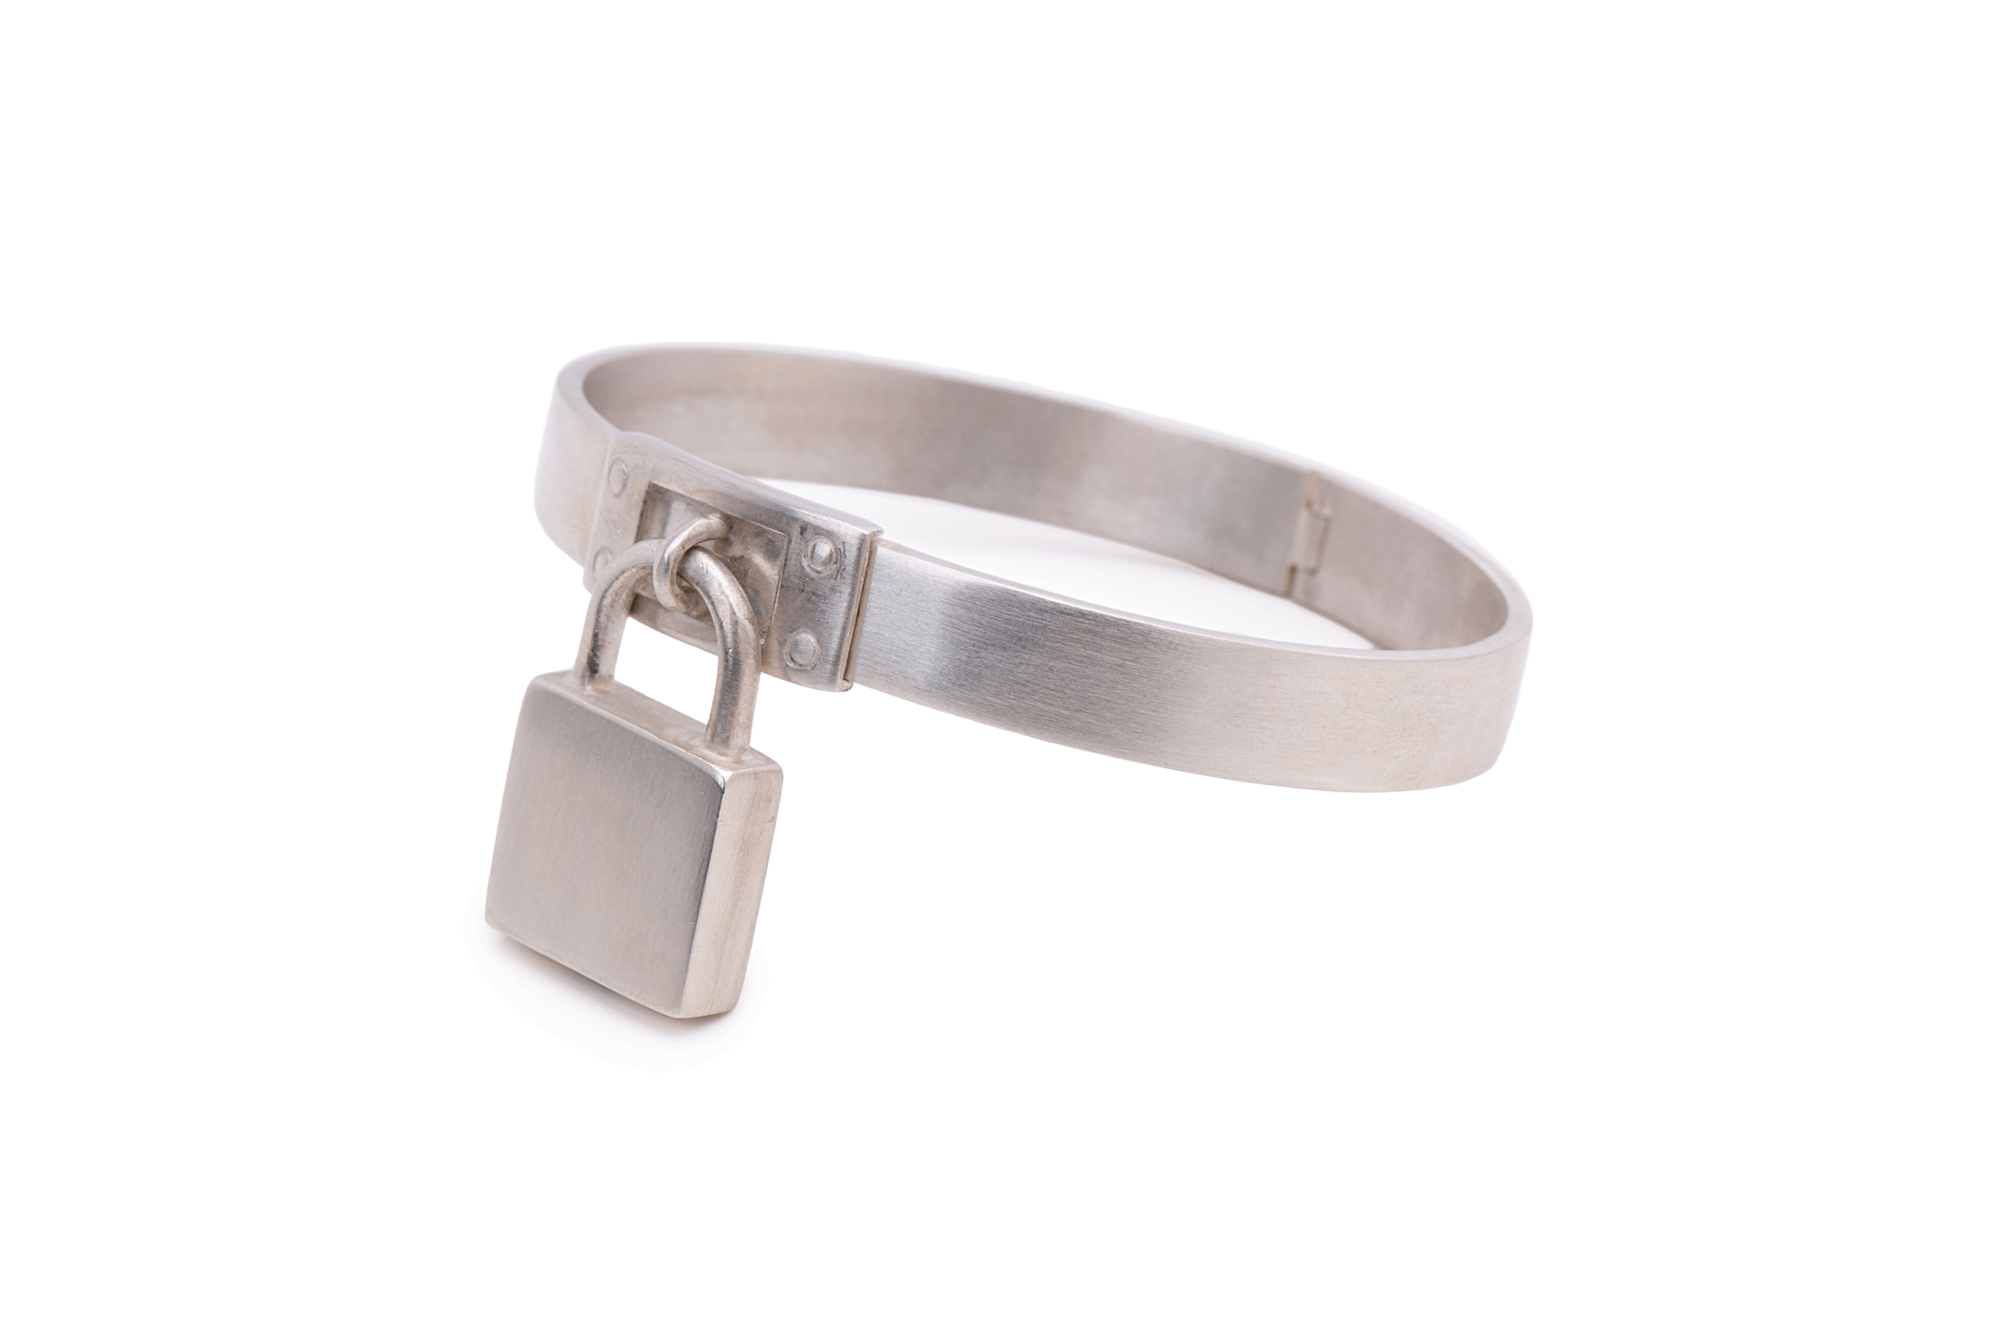 Cuff Bracelet Unisex Lock With a Key Sterling Silver 925 and